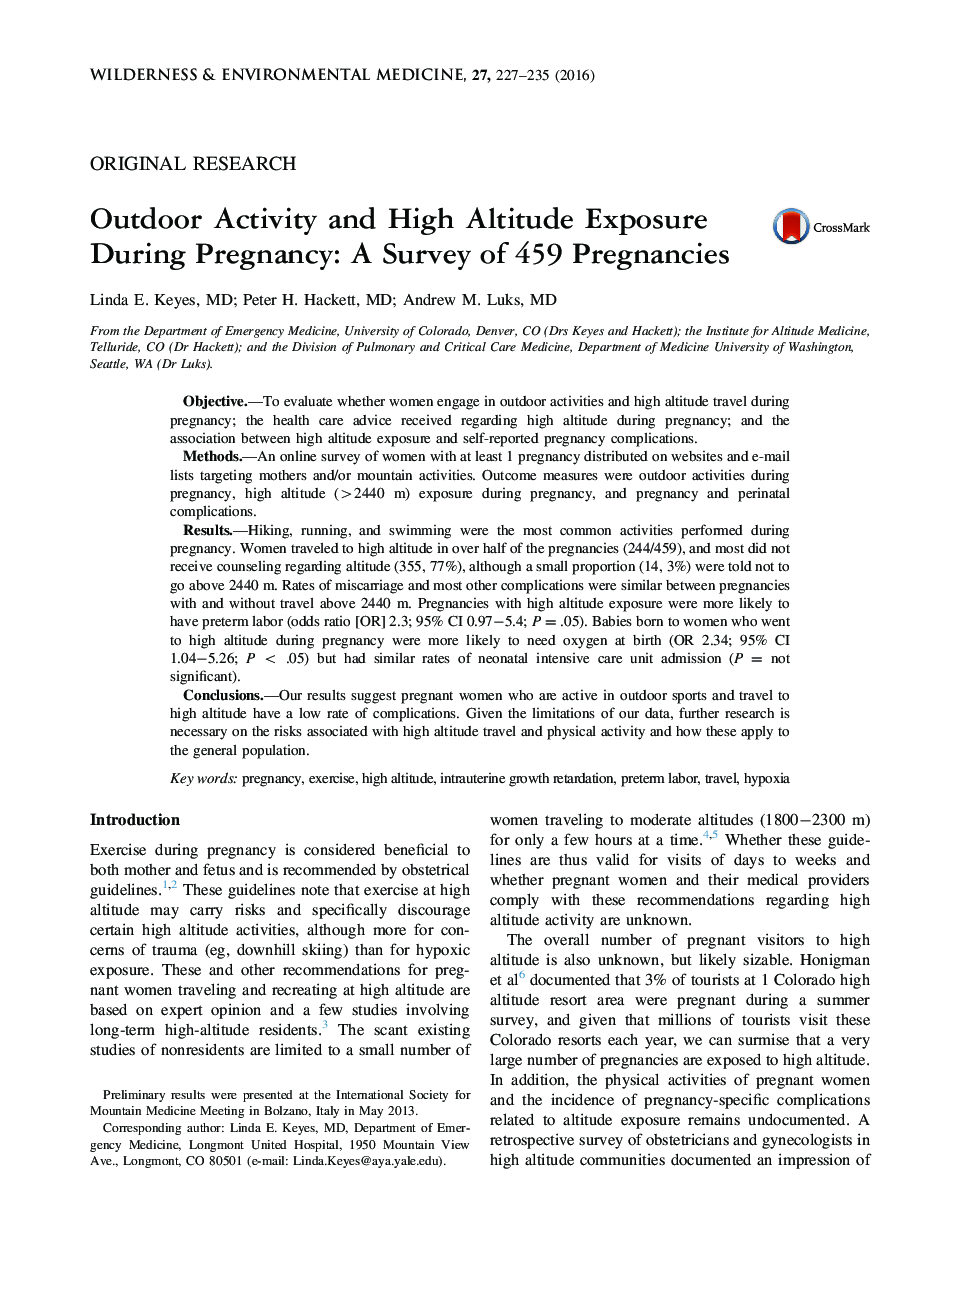 Outdoor Activity and High Altitude Exposure During Pregnancy: A Survey of 459 Pregnancies ★★